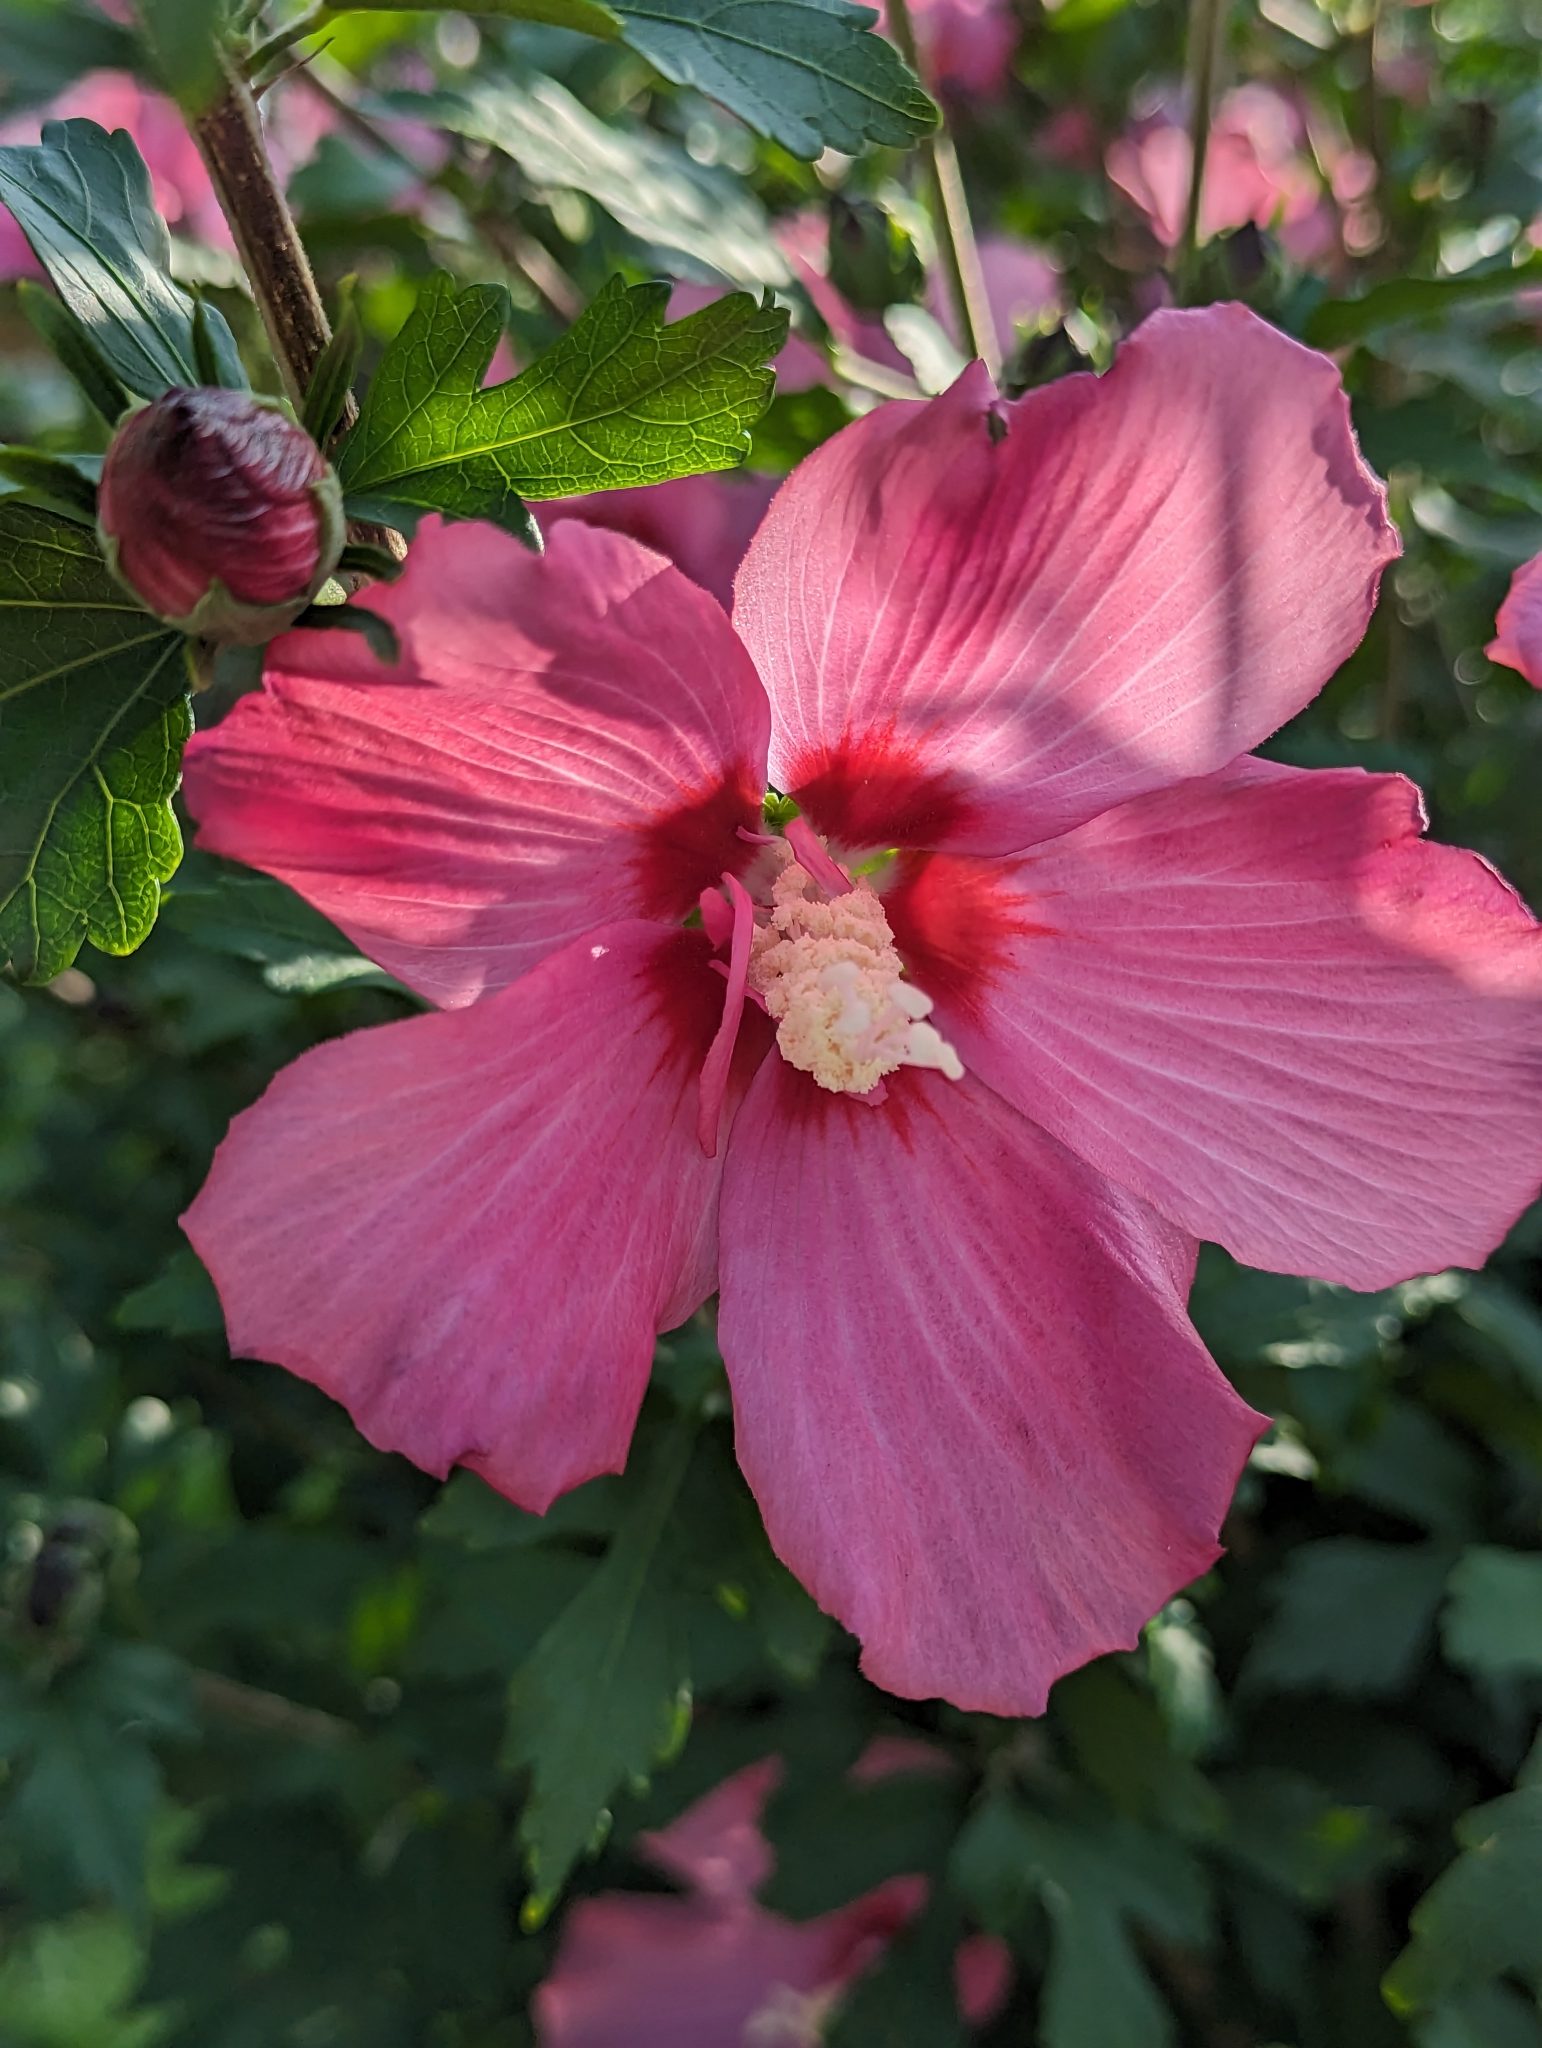 A big pink habiscus flower that is very open